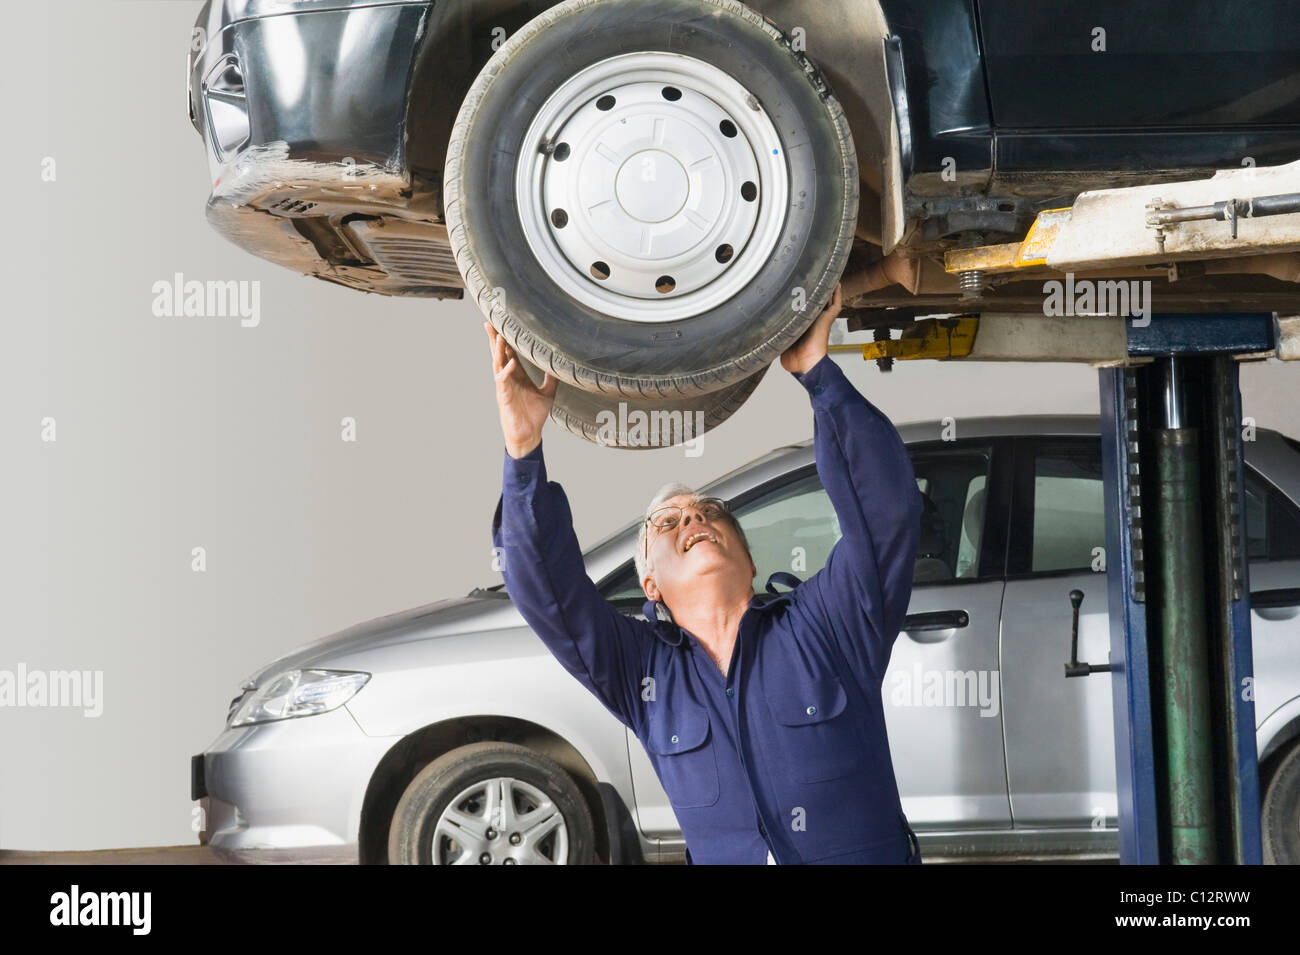 Auto mechanic working on a car wheel in a garage Stock Photo